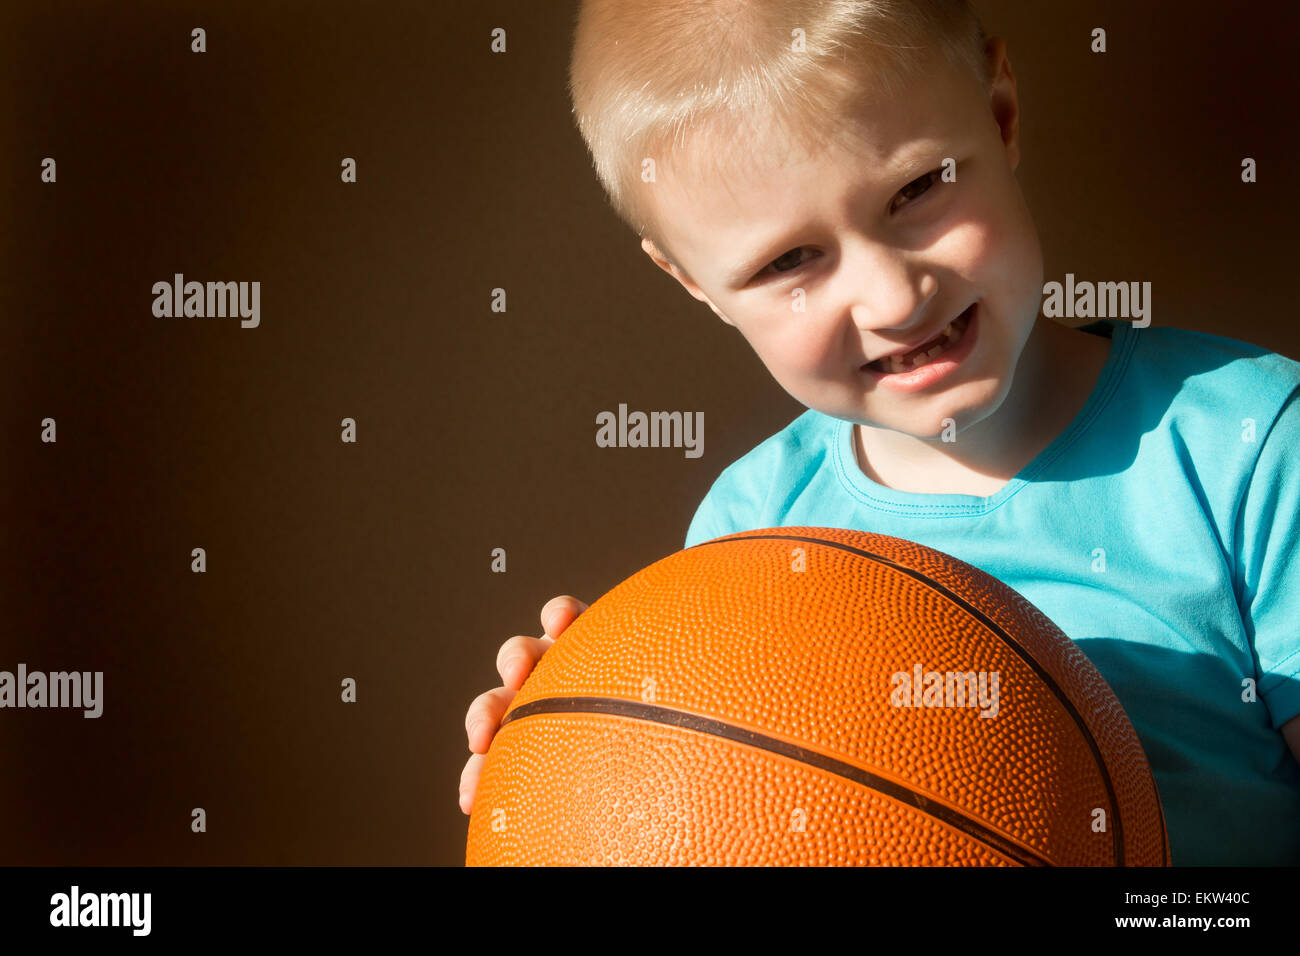 Beautiful happy little child (boy) with basketball, close up horizontal portrait with copy space Stock Photo